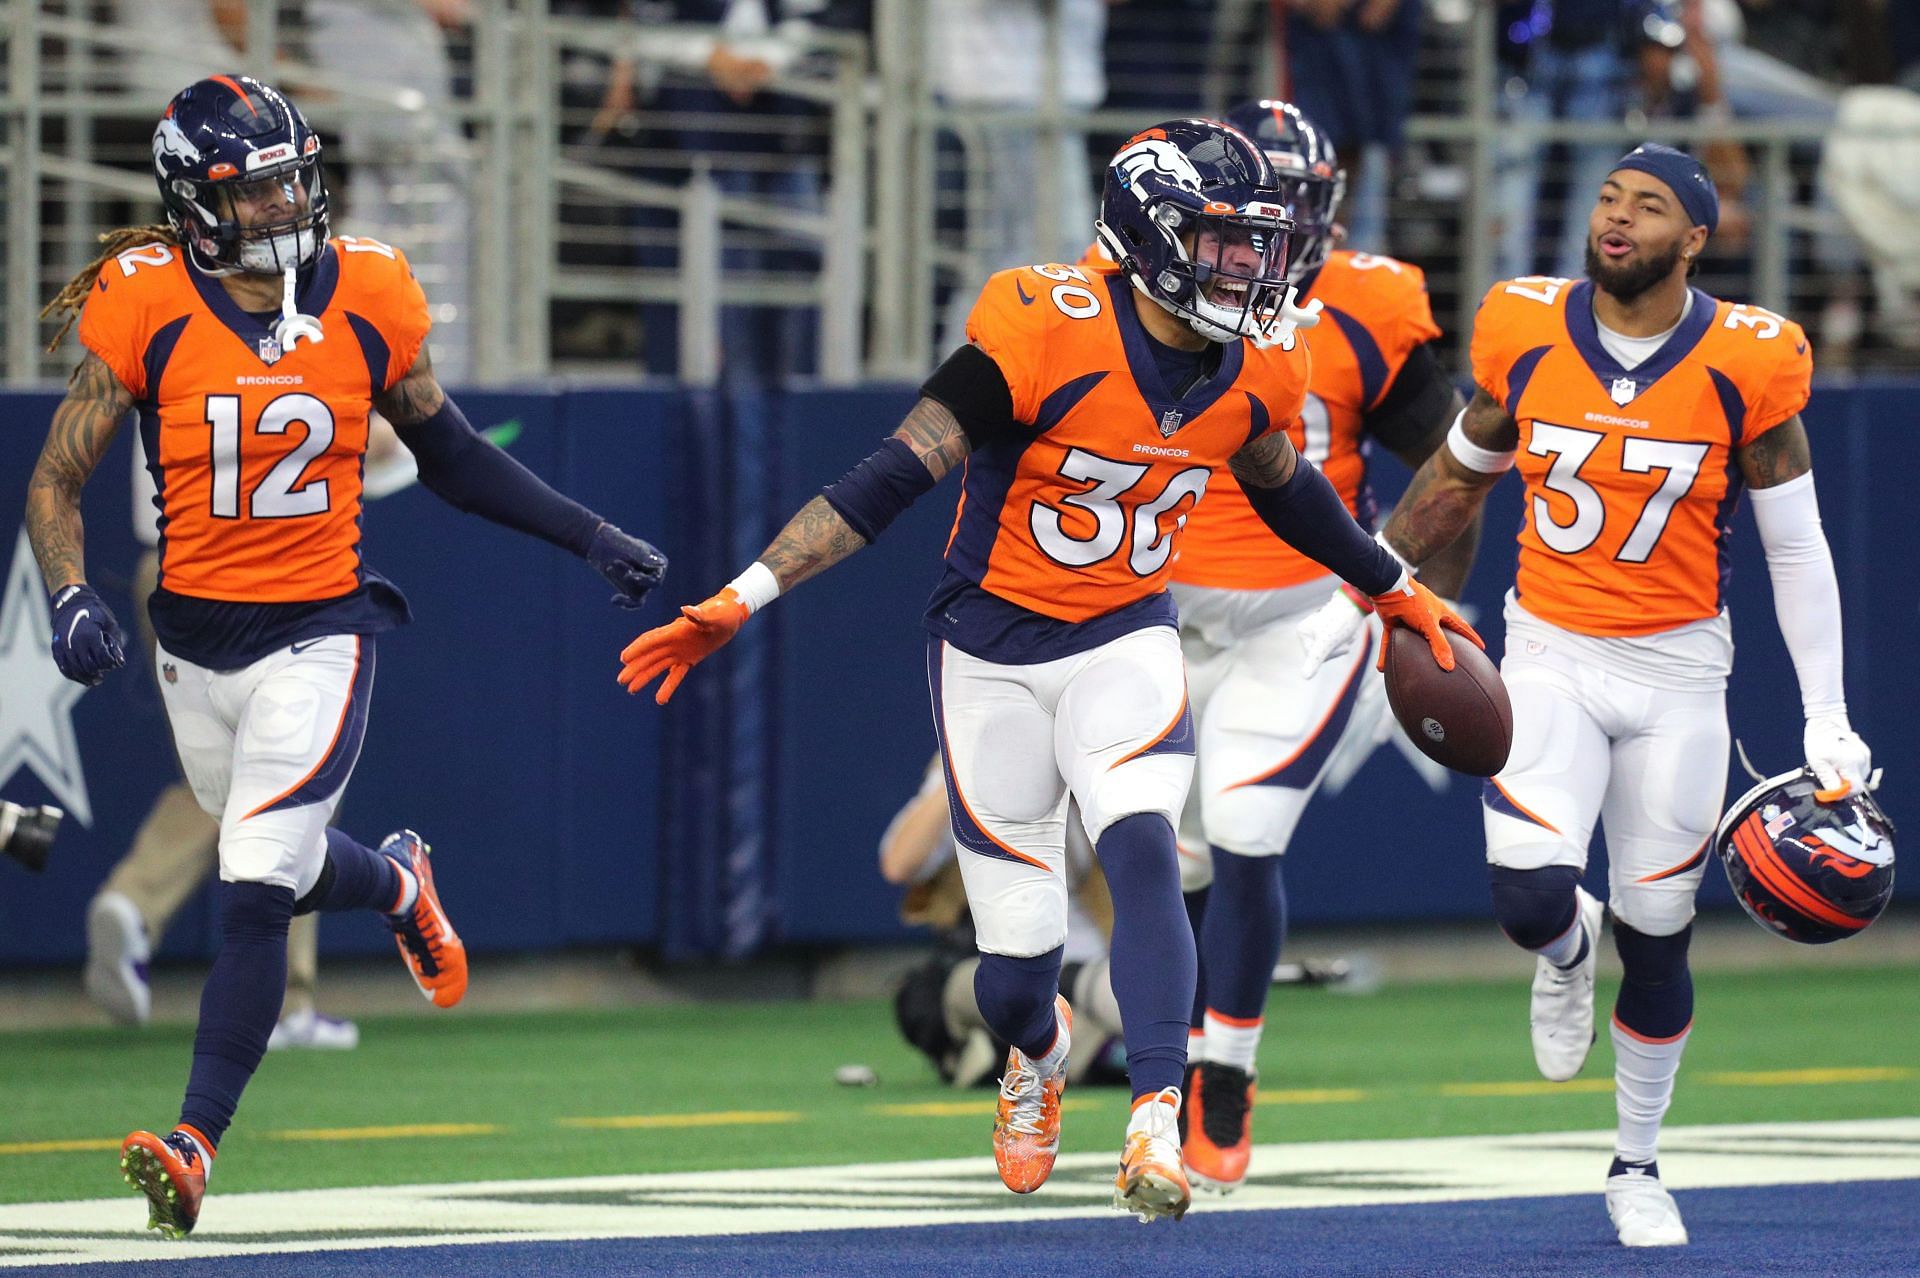 The Denver defense celebrates after a turnover during their Week 9 win over Dallas